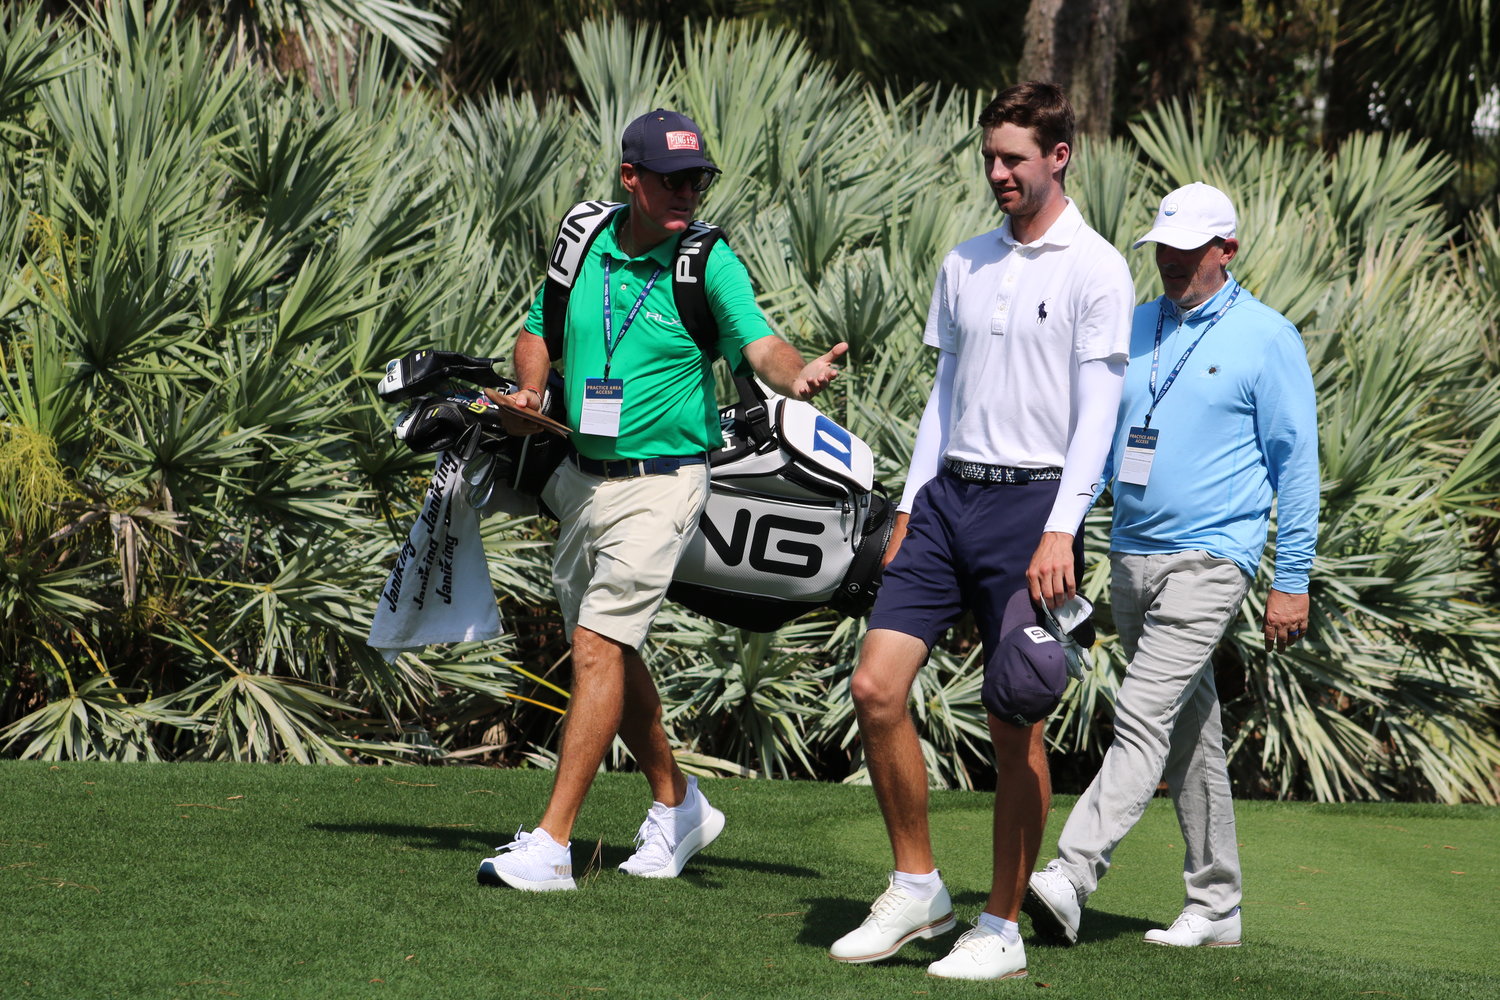 Players spend time analyzing their game with the caddy and swing coach during practice rounds.